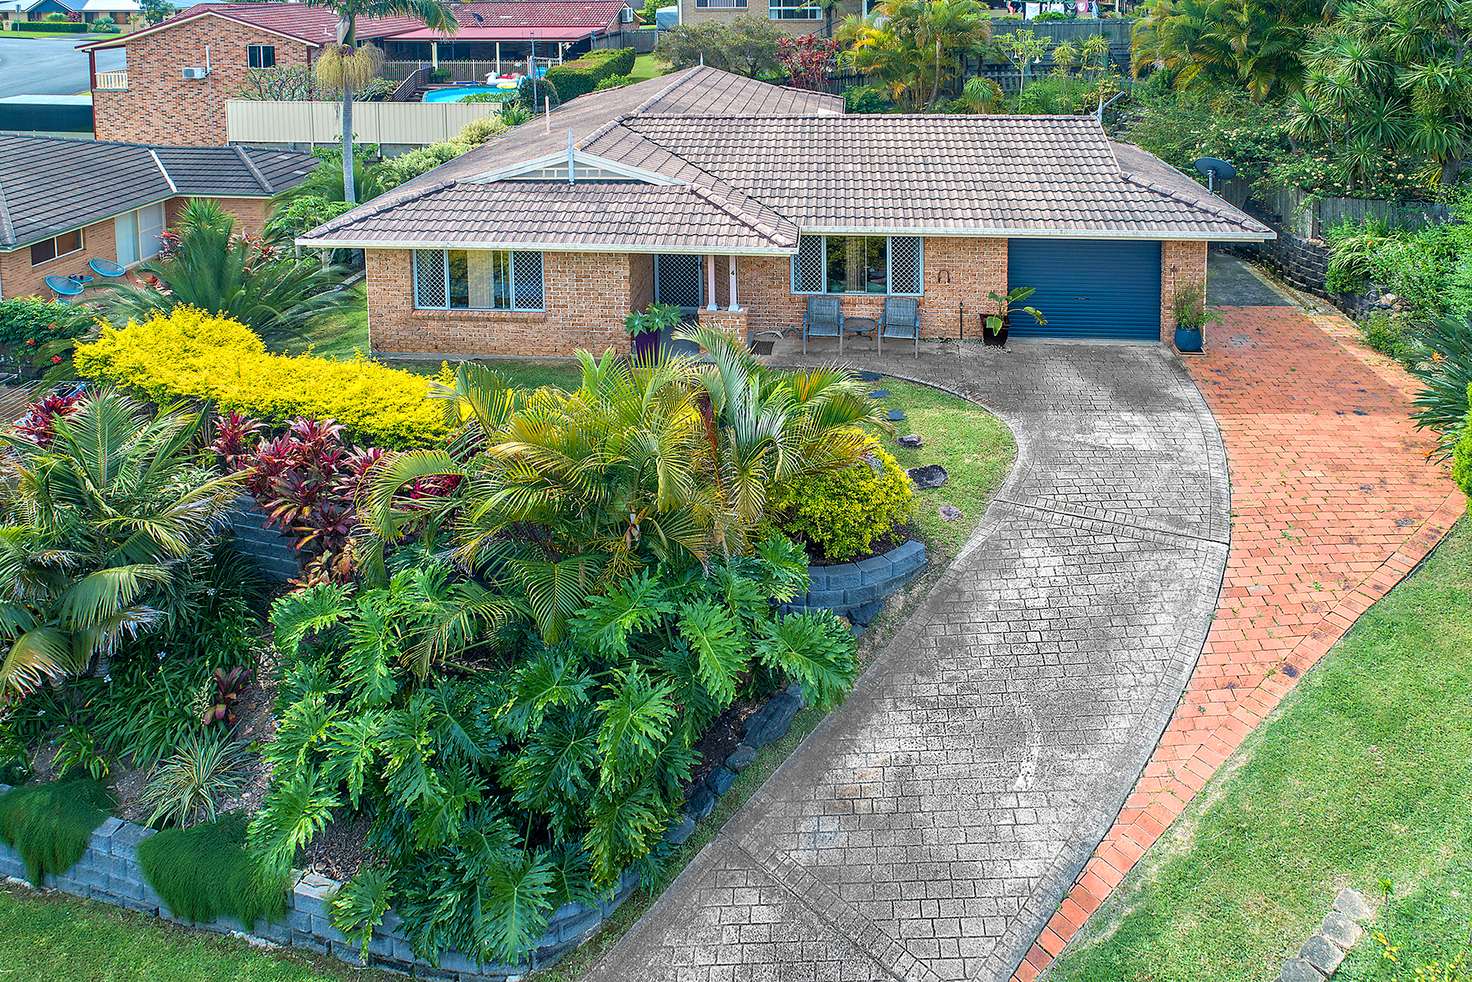 Main view of Homely house listing, 4 Ilex court, Boambee East NSW 2452